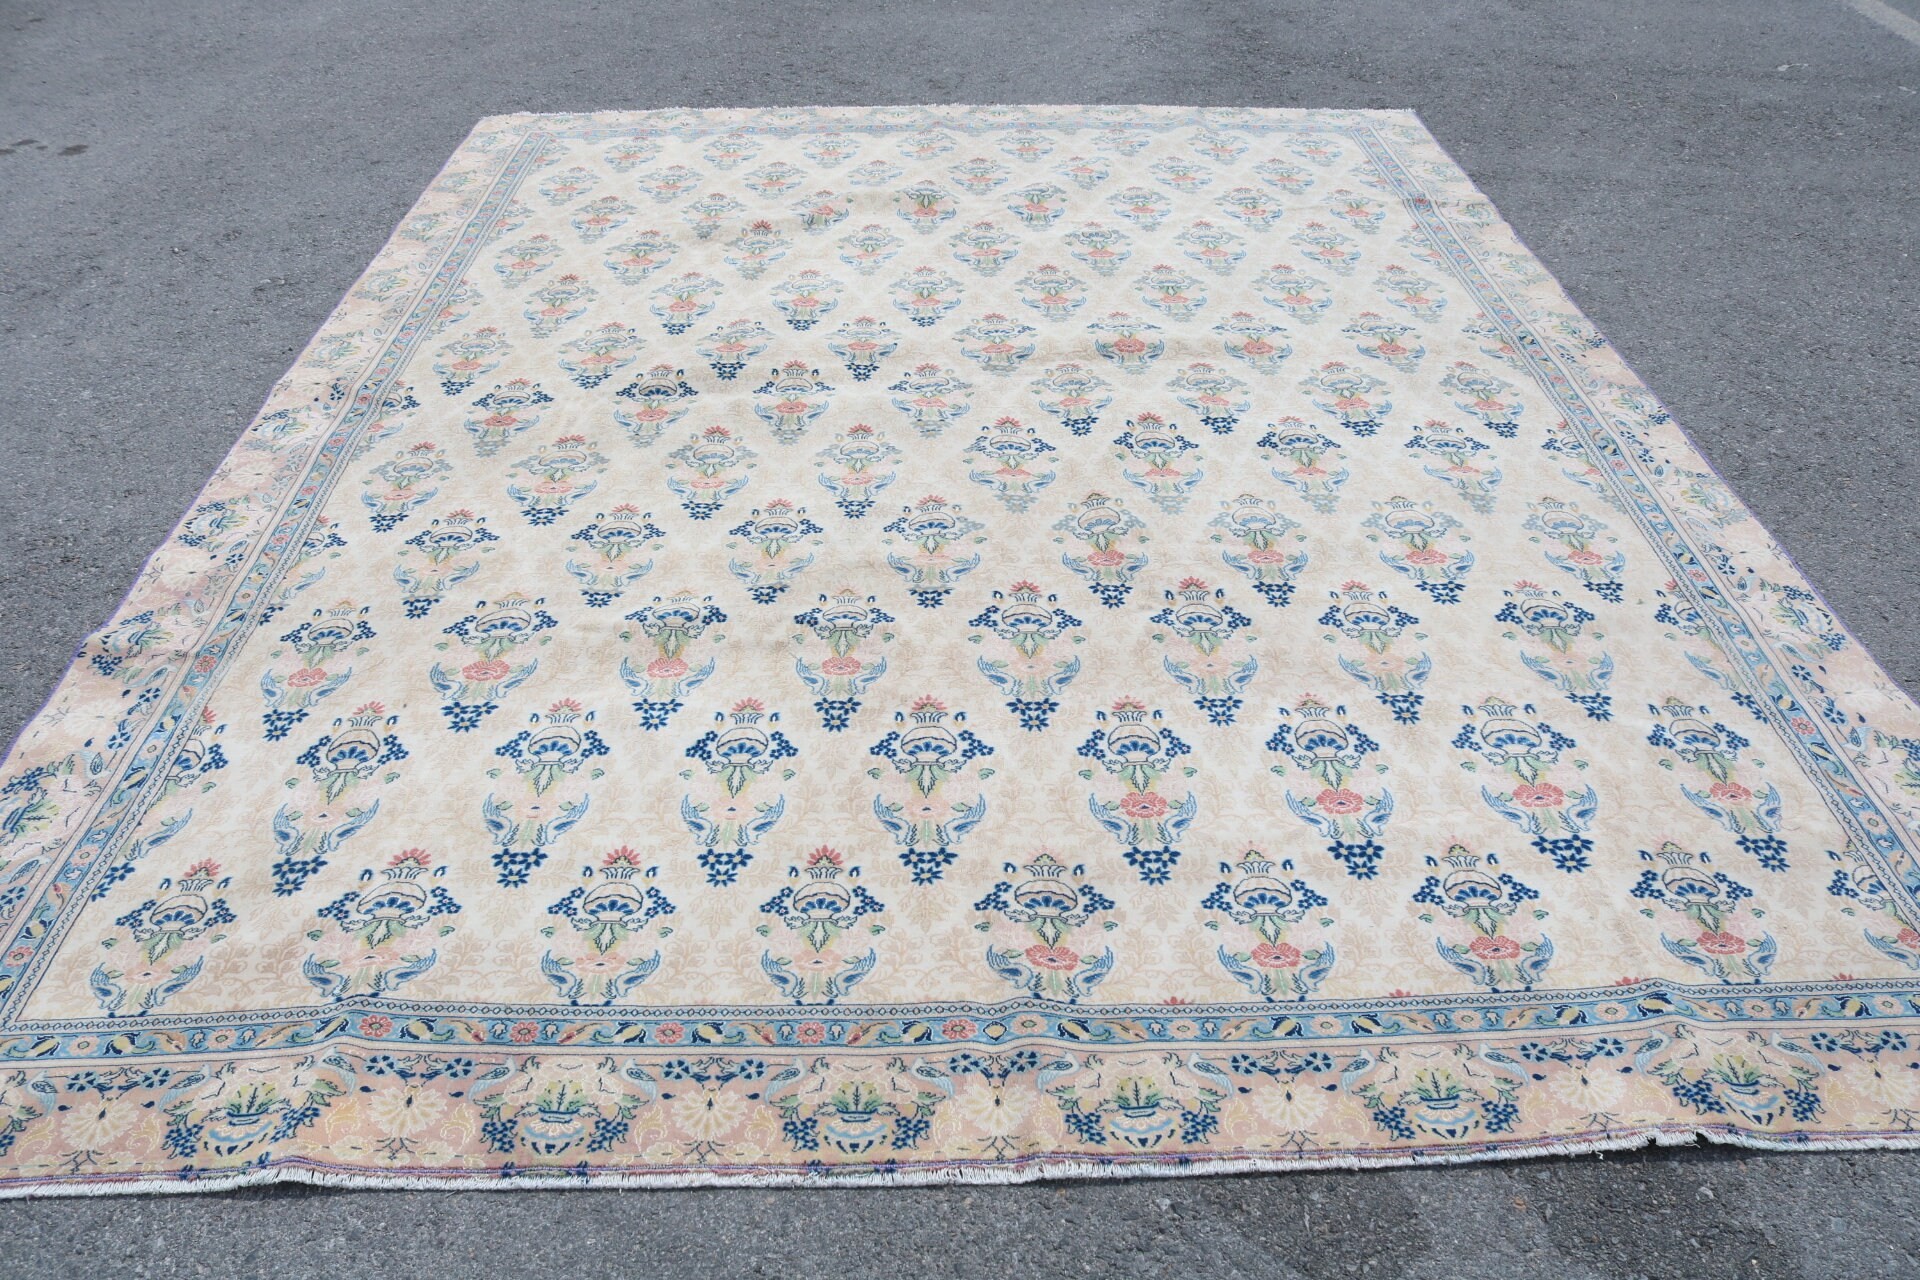 Pale Rugs, Cool Rug, Saloon Rug, Colorful Rugs, 8.9x11.9 ft Oversize Rug, Turkish Rugs, Rugs for Dining Room, Salon Rug, Vintage Rugs